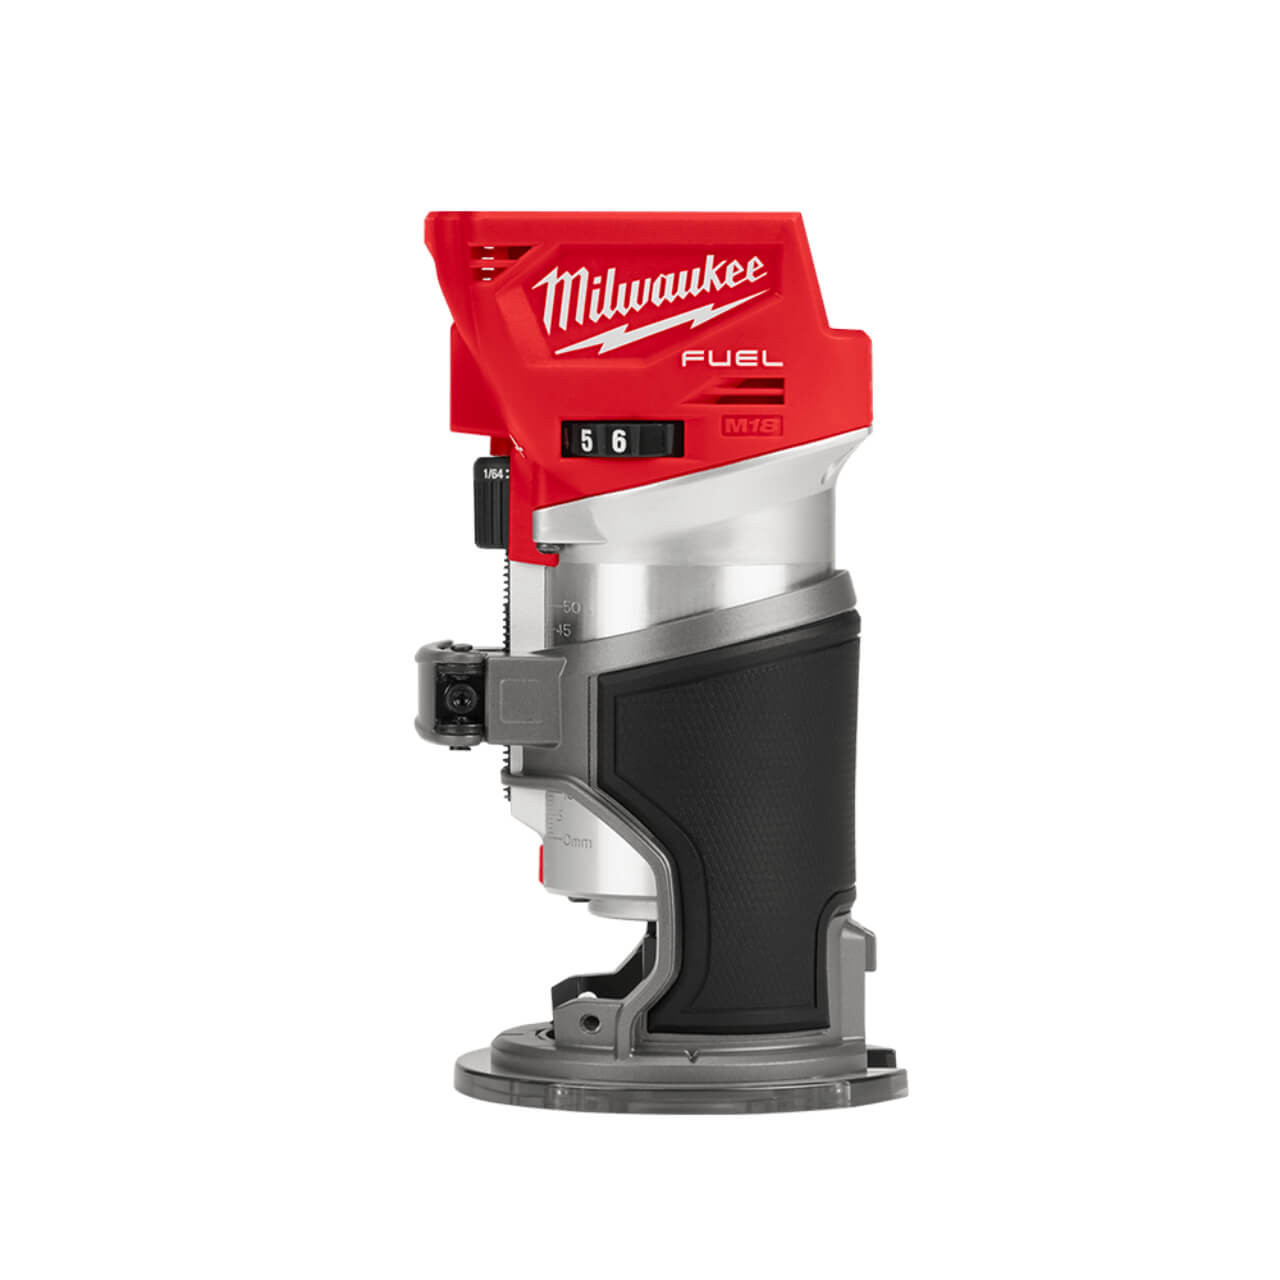 Milwaukee M18 Fuel Cordless Laminate Trimmer Skin Only